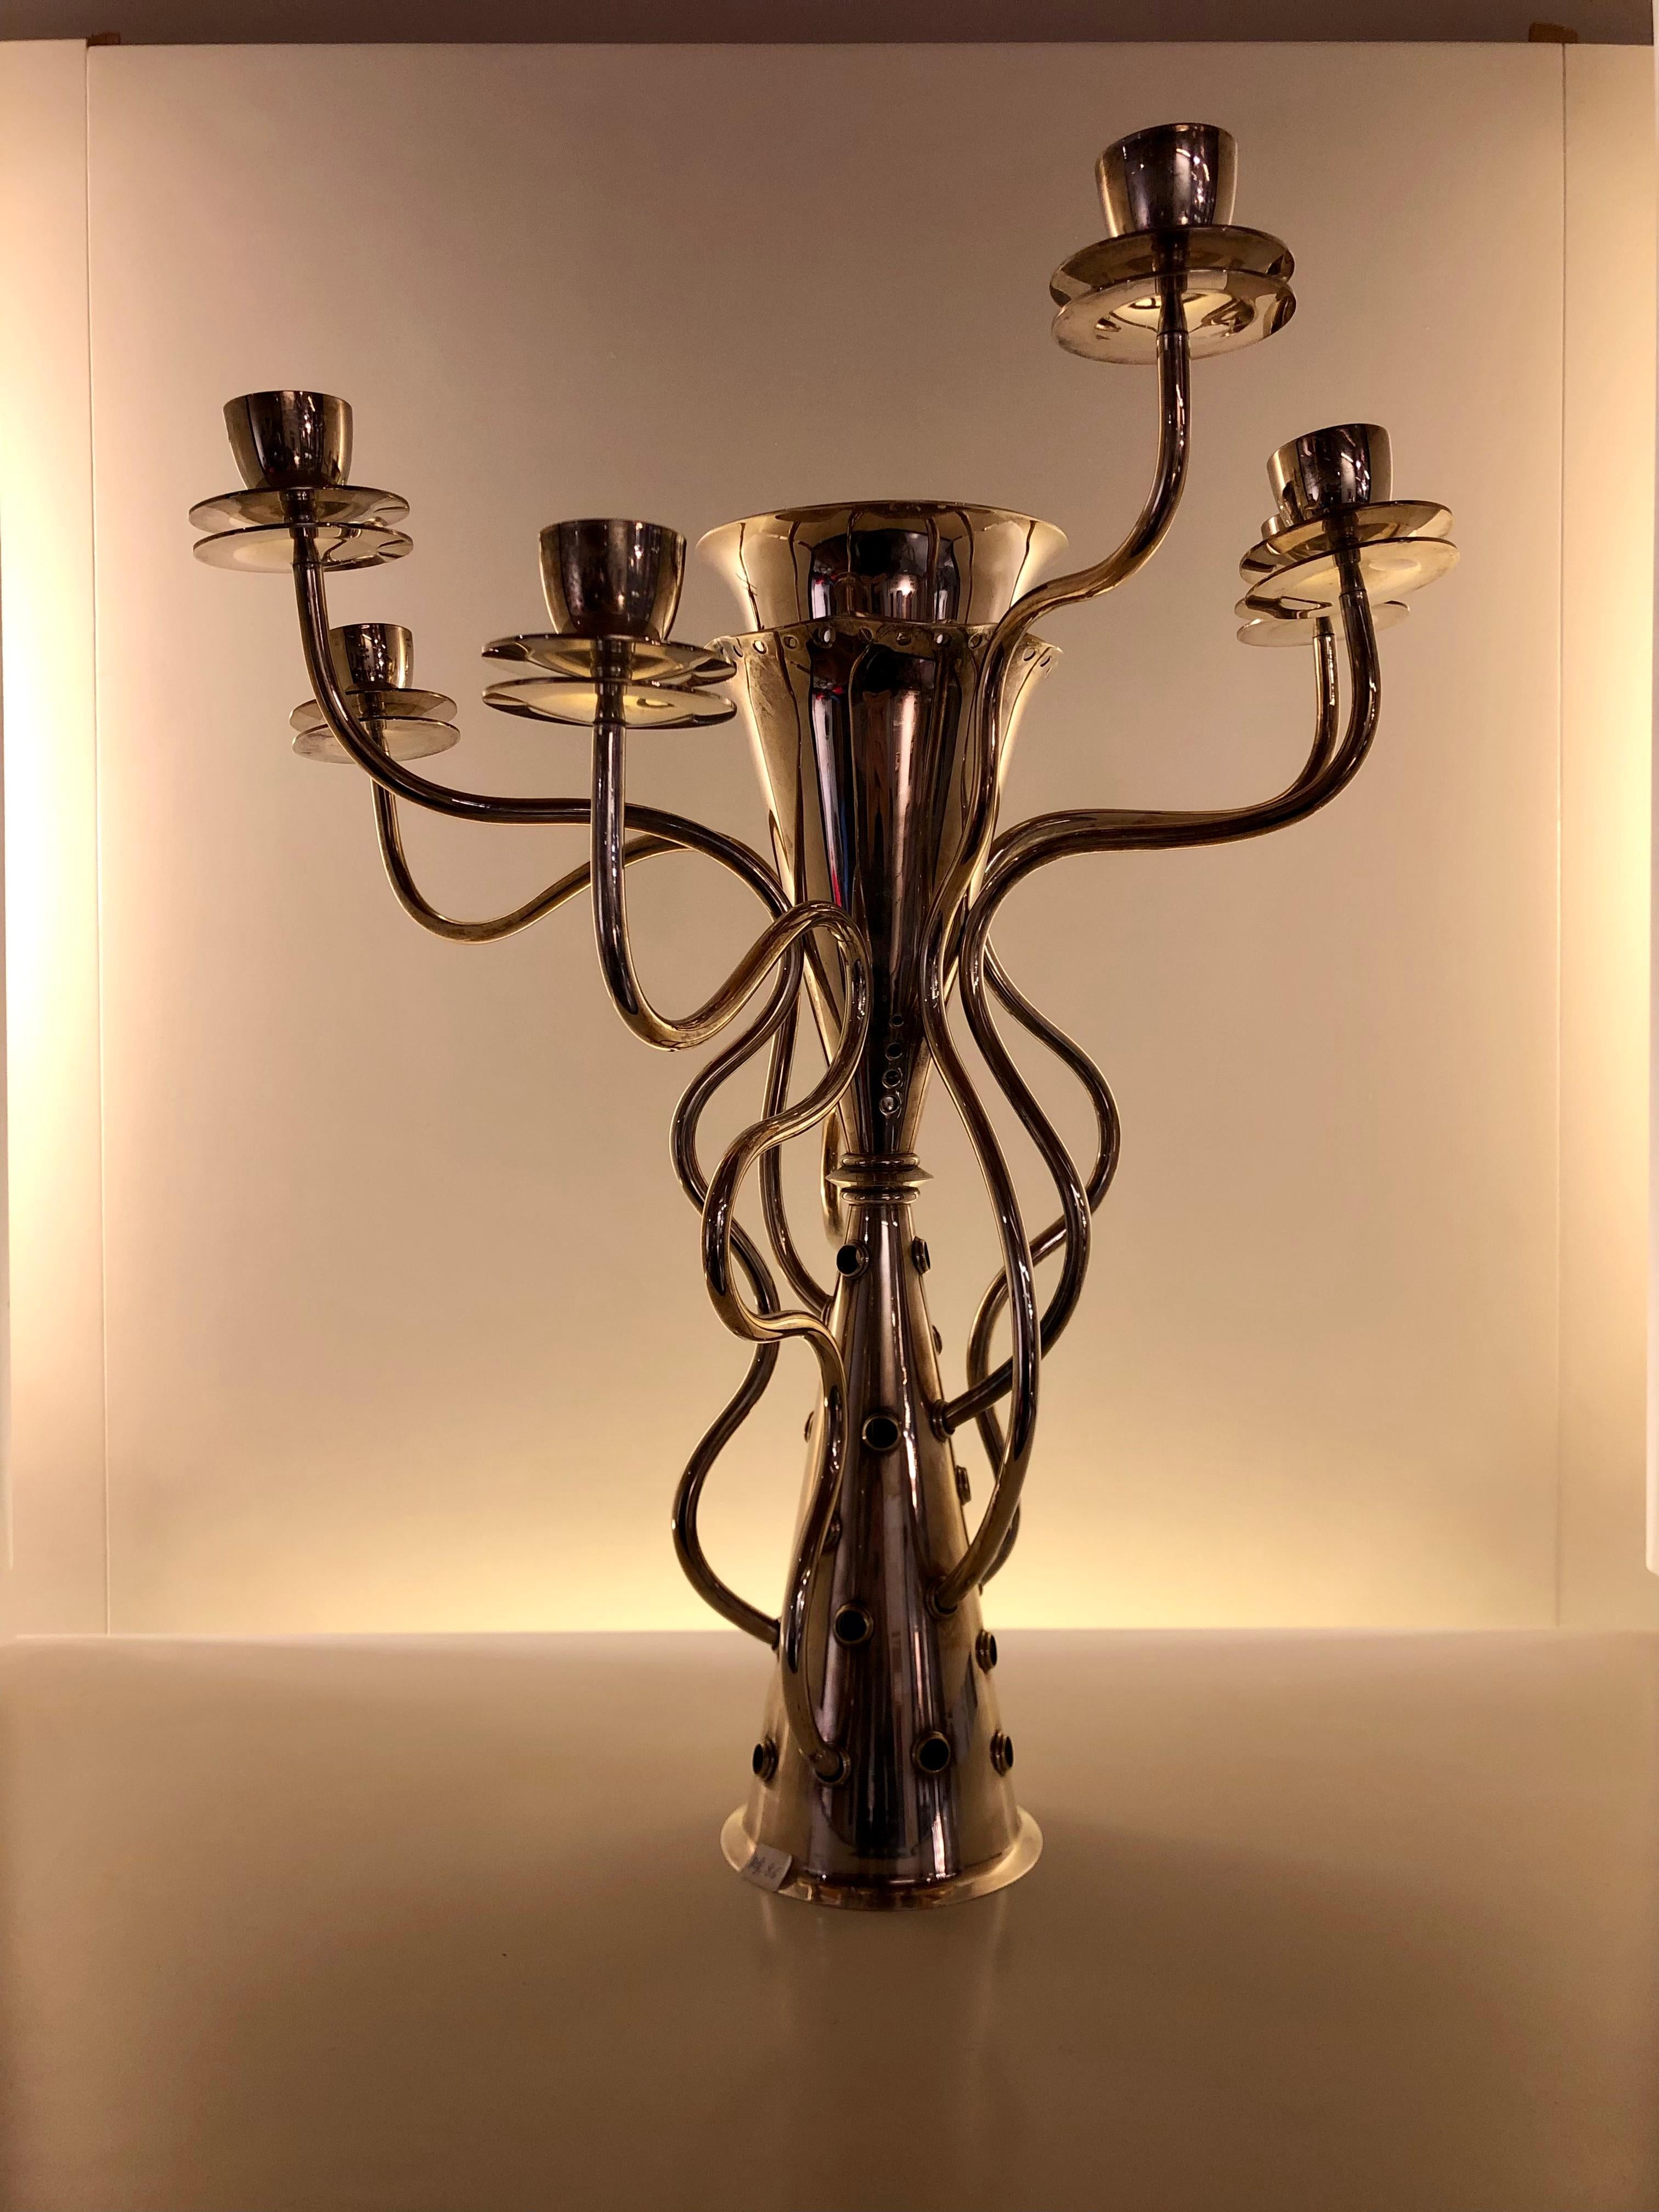 Silver plated metal candleholder “Simon” by Borek Sipek for Driade in the eighties.
You can also use the center like a flower vase.